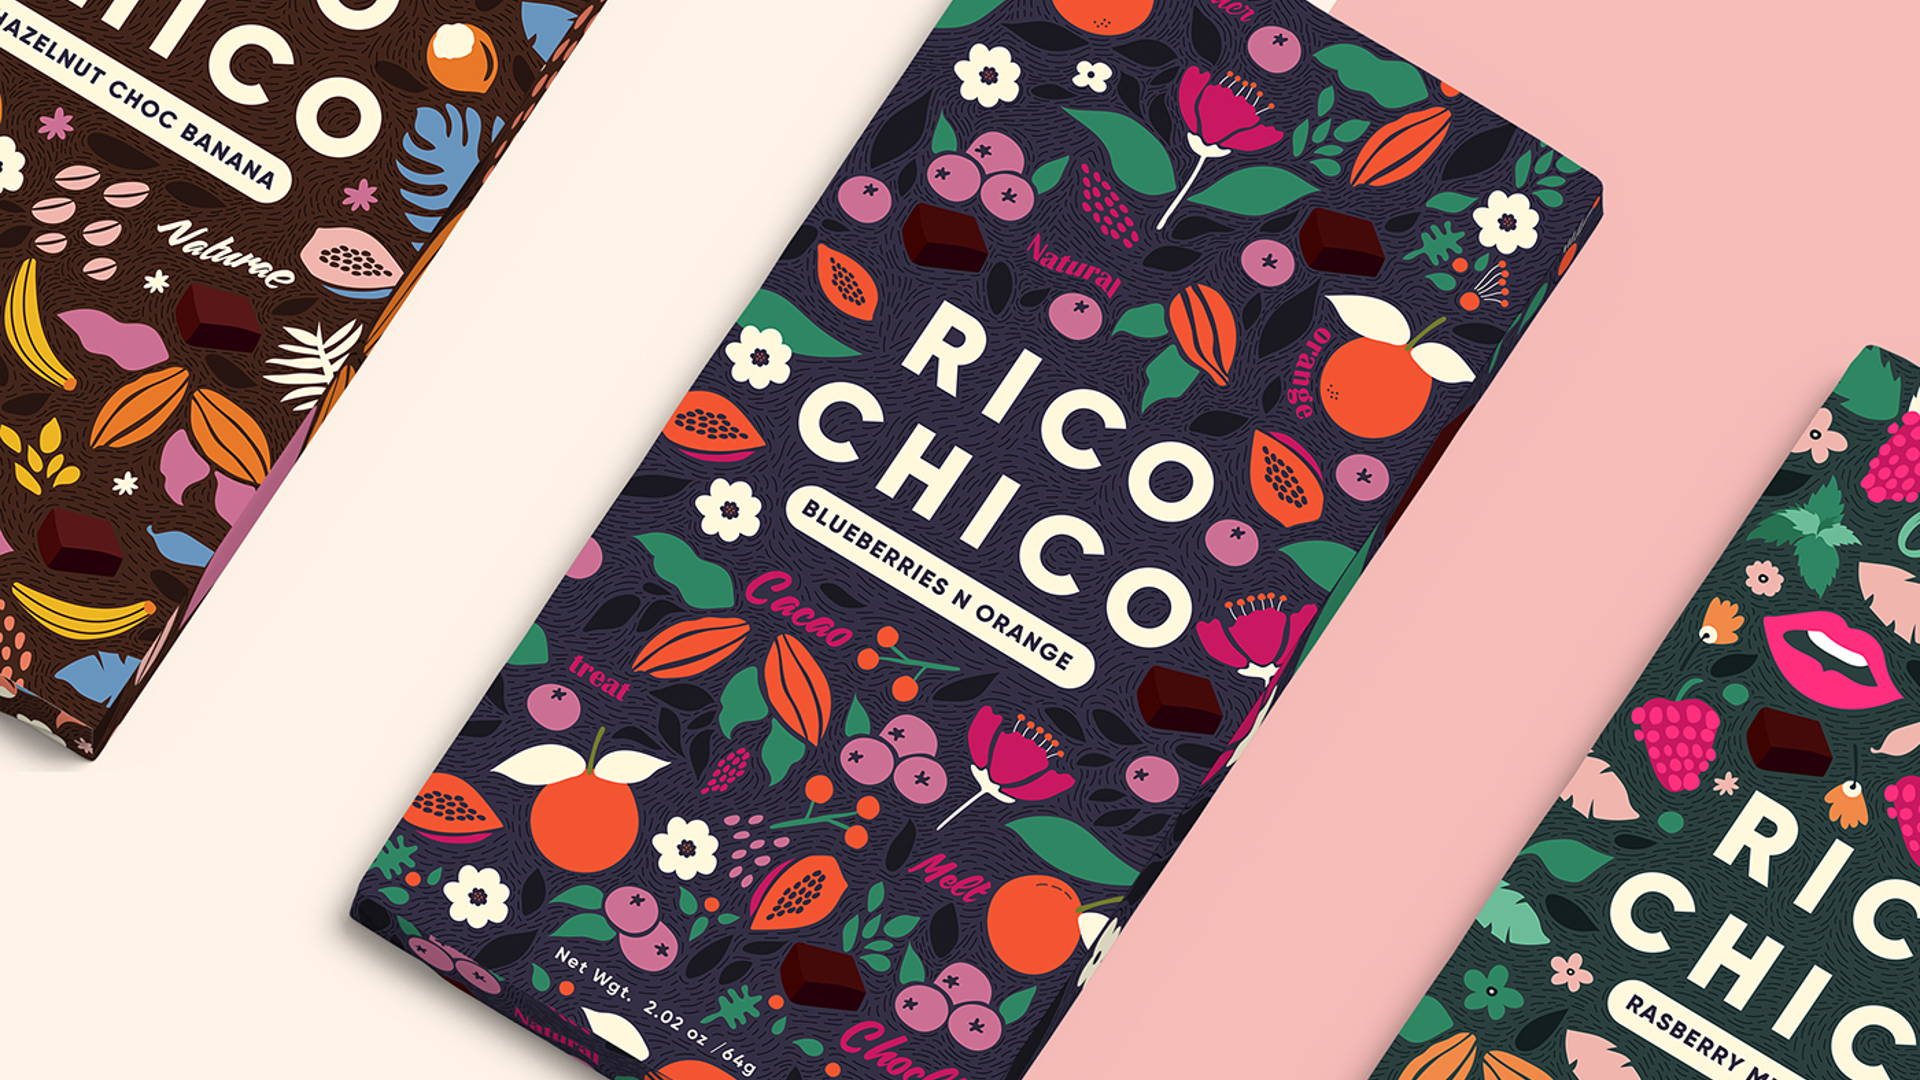 Featured image for Rico Chico Chocolate Comes With Illustrations as Bold as The Flavors Themselves